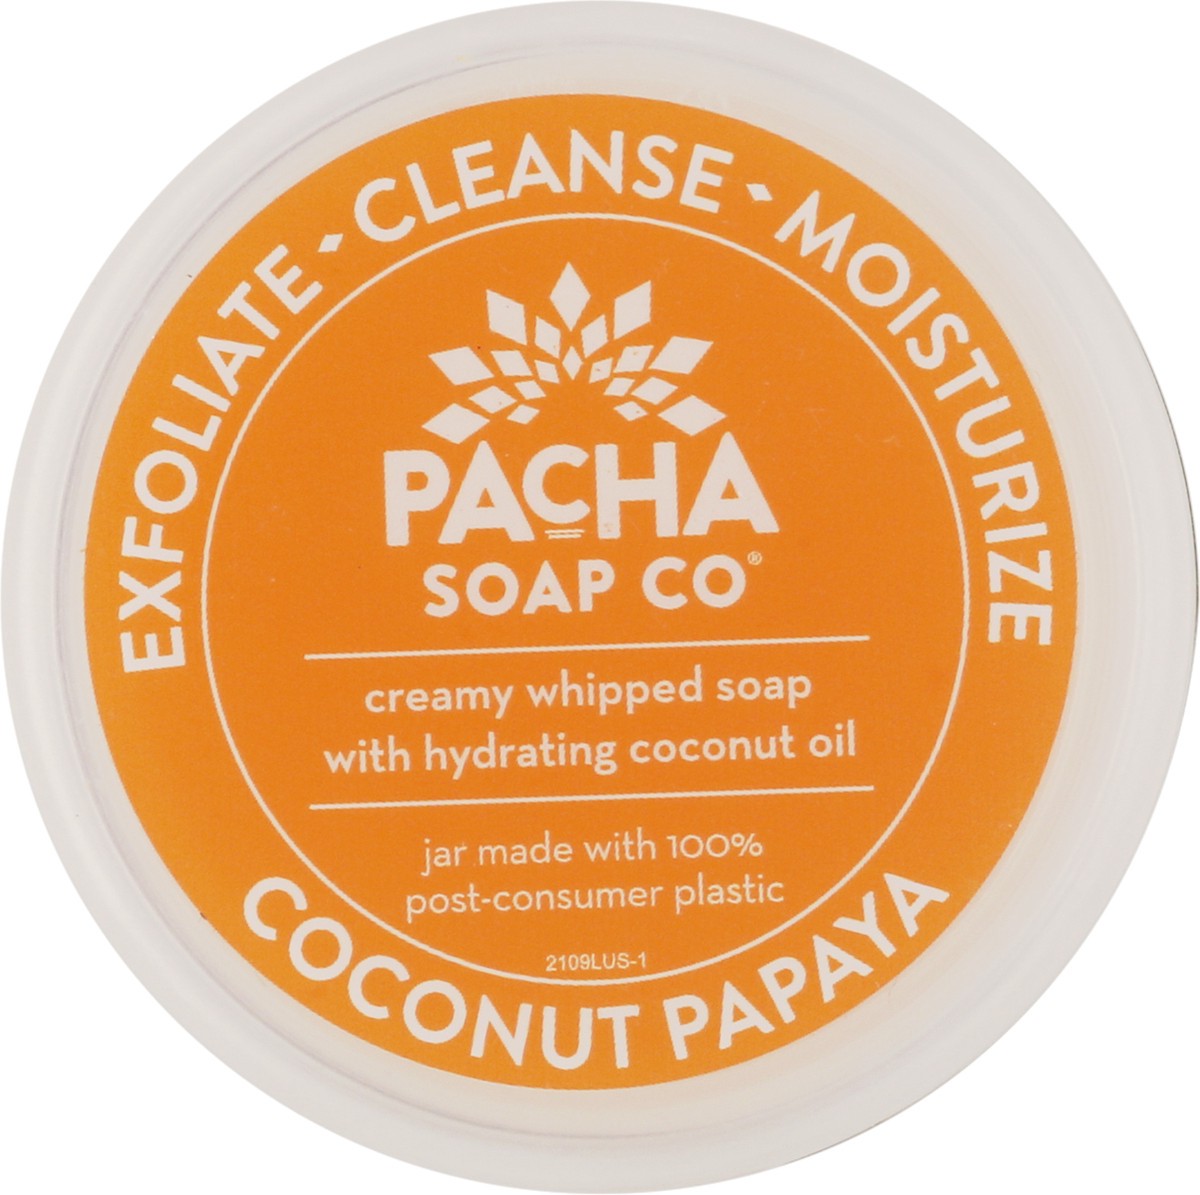 slide 9 of 9, Pacha Soap Co. Coconut Papaya Whipped Soap + Scrub 8 pack, 8 ct